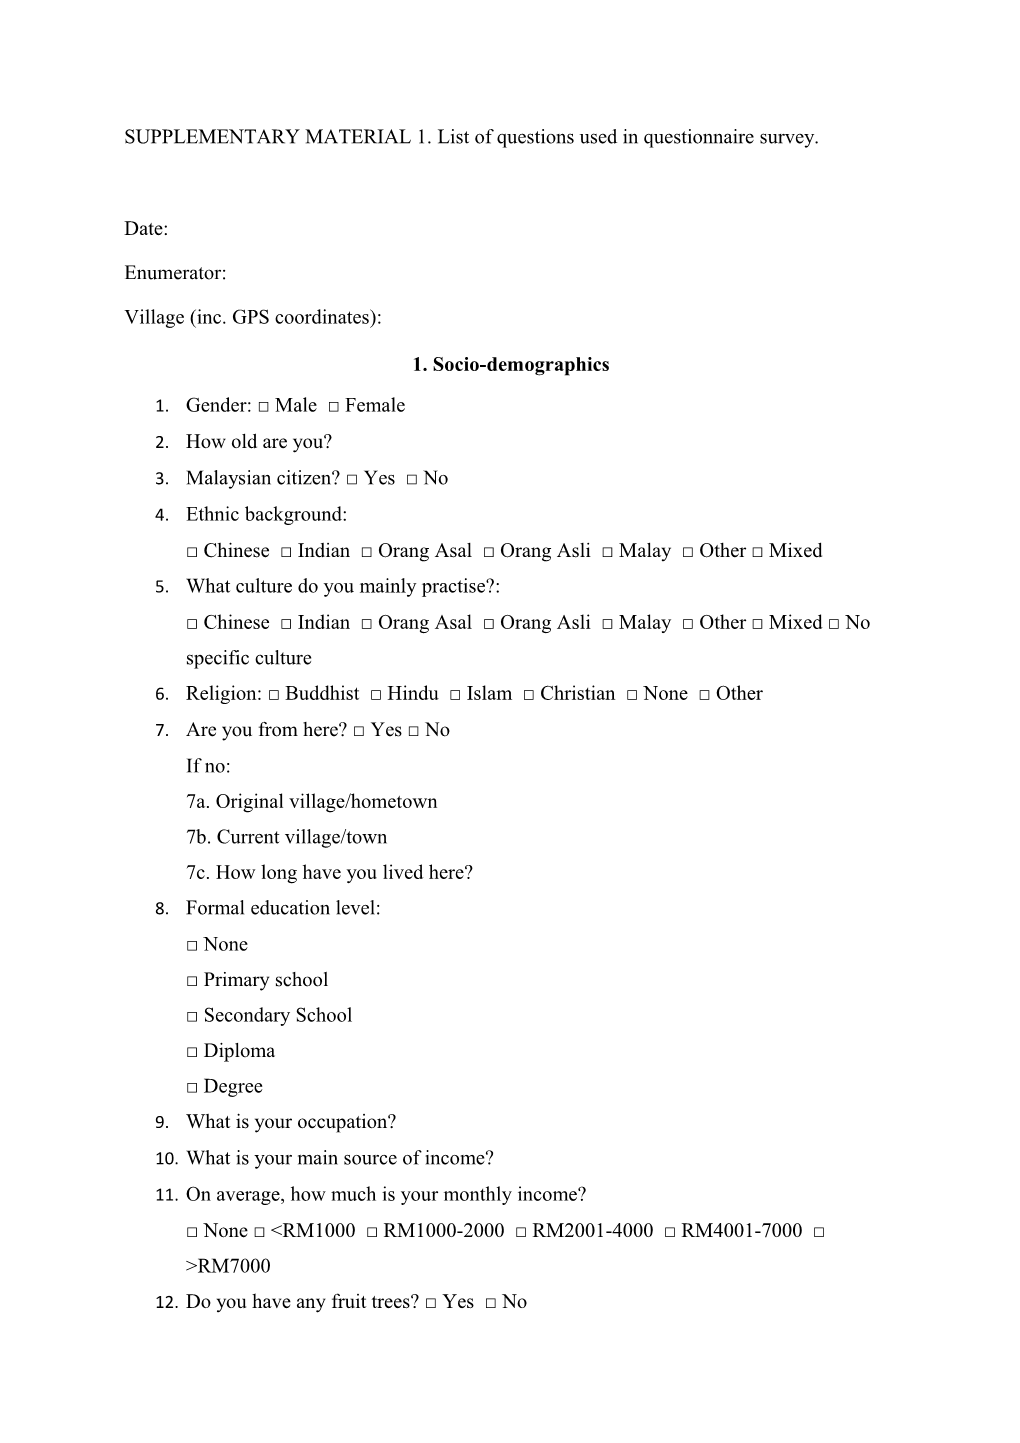 SUPPLEMENTARY MATERIAL 1.List of Questions Used in Questionnaire Survey